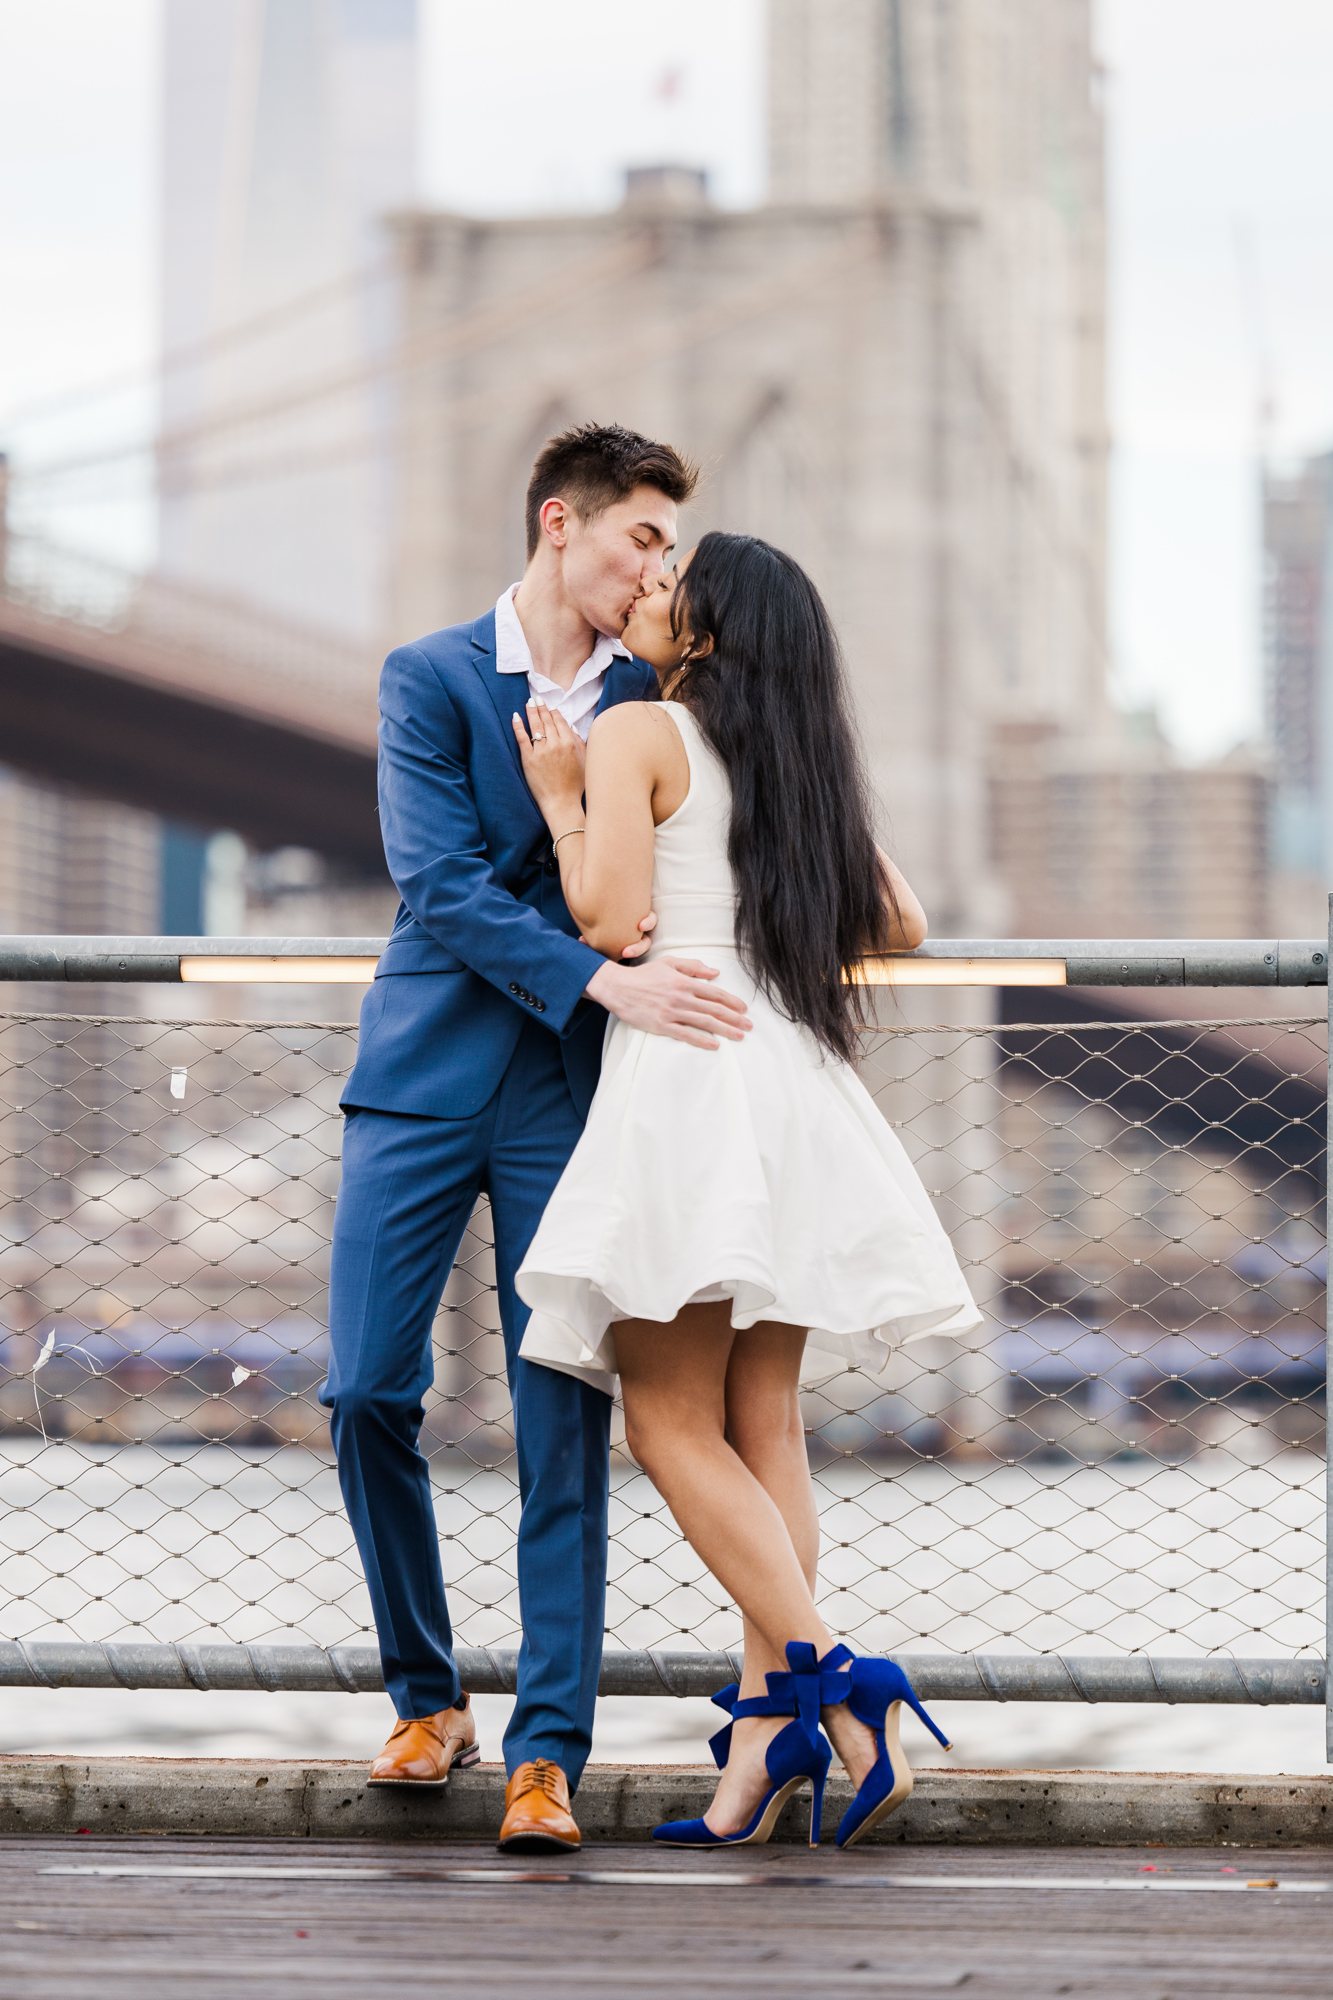 Dazzling Spring Engagement Photography in DUMBO